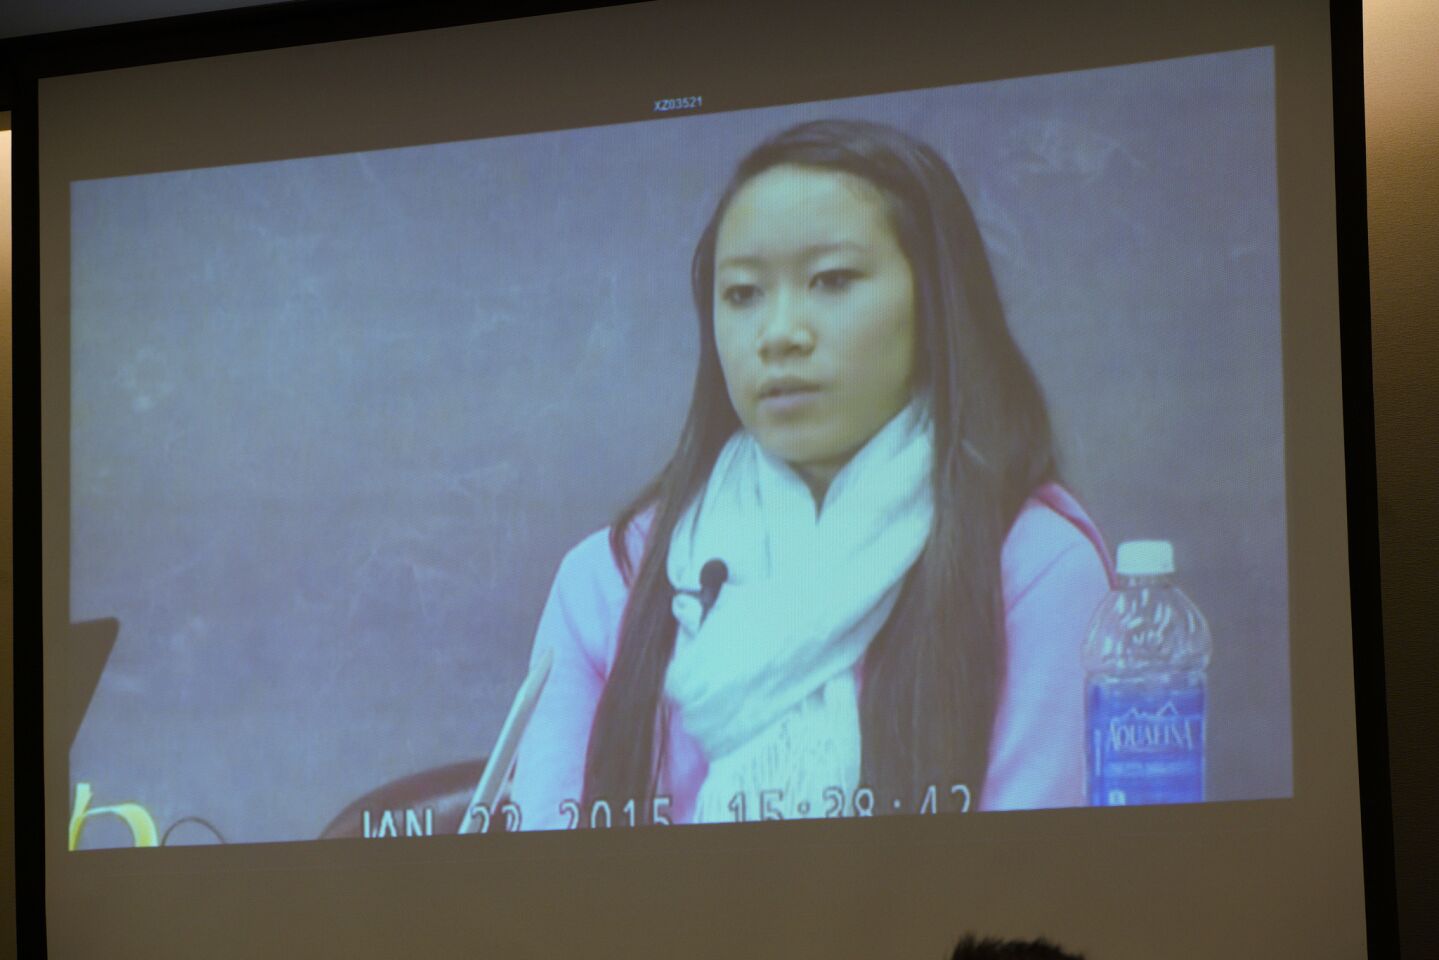 A video is played in court of Rebecca Zahau's younger sister Xena Zahau's taken during her January 22, 2015 deposition.